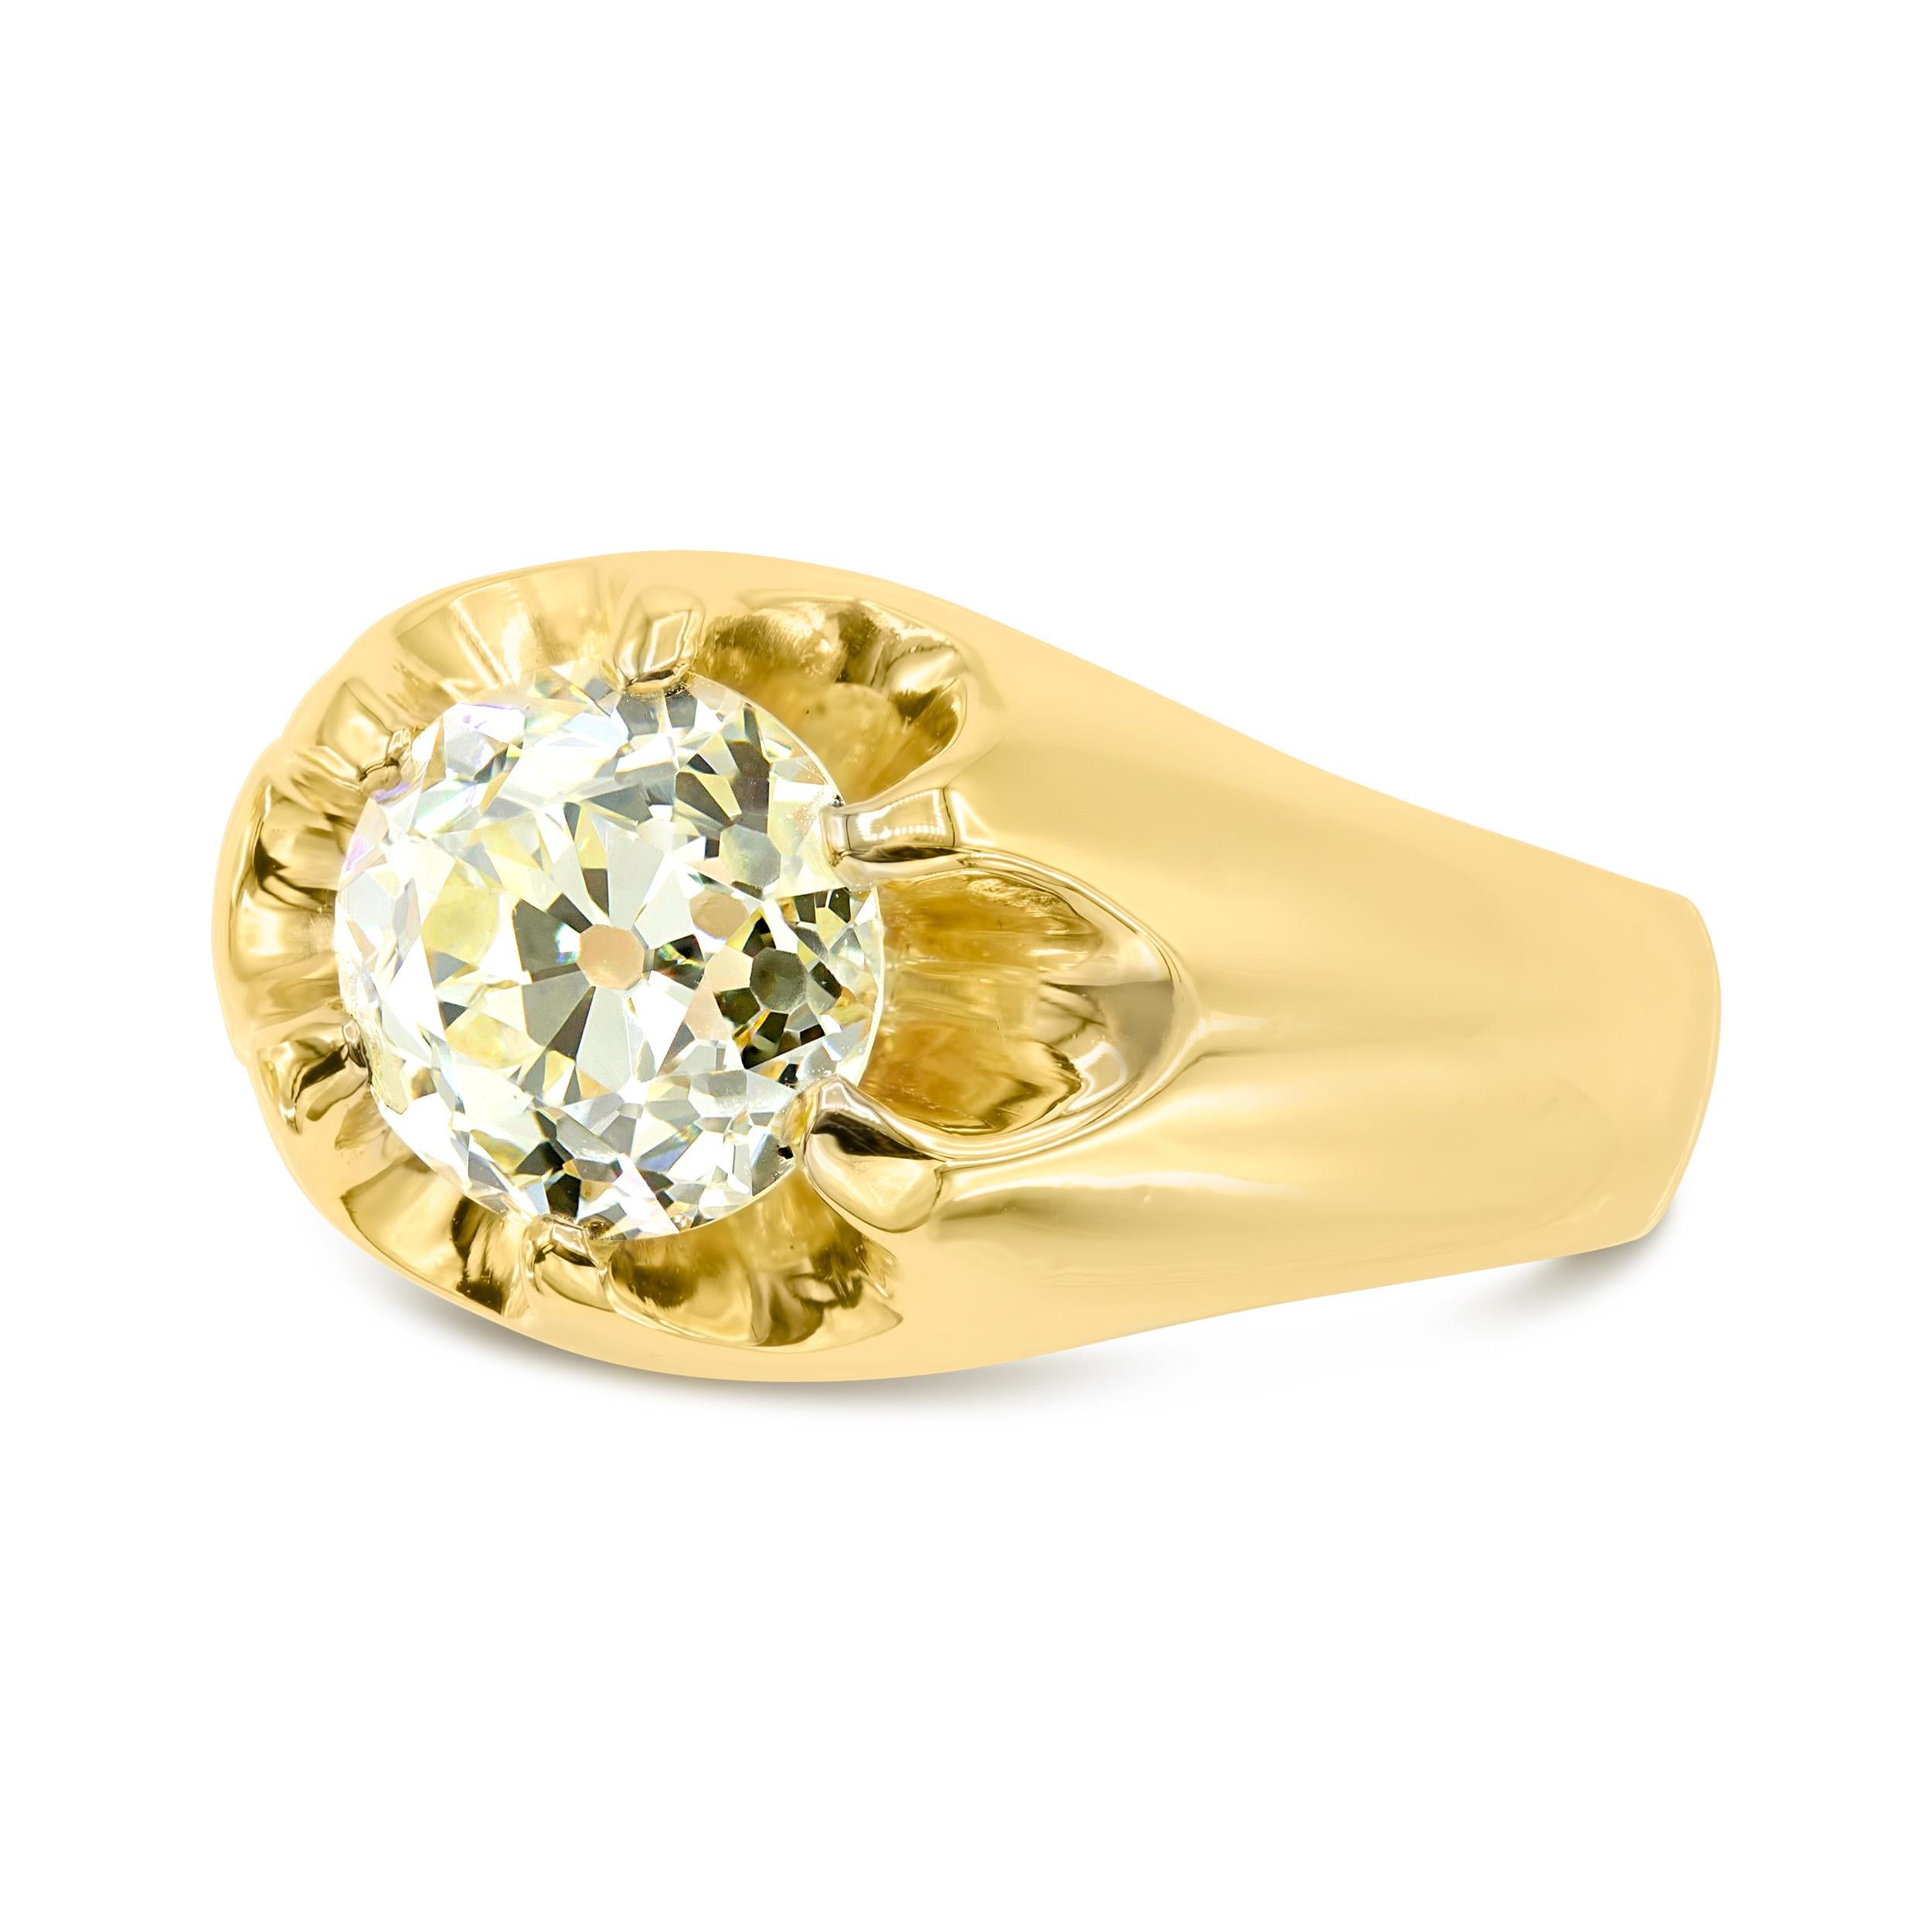 Chunky, bold, yellow gold belcher rings are one of my favorite styles. This one features a warm old European cut diamond with amazing antique proportions. We love a ring that could easily be suited for a super cool engagement style, or a really bold